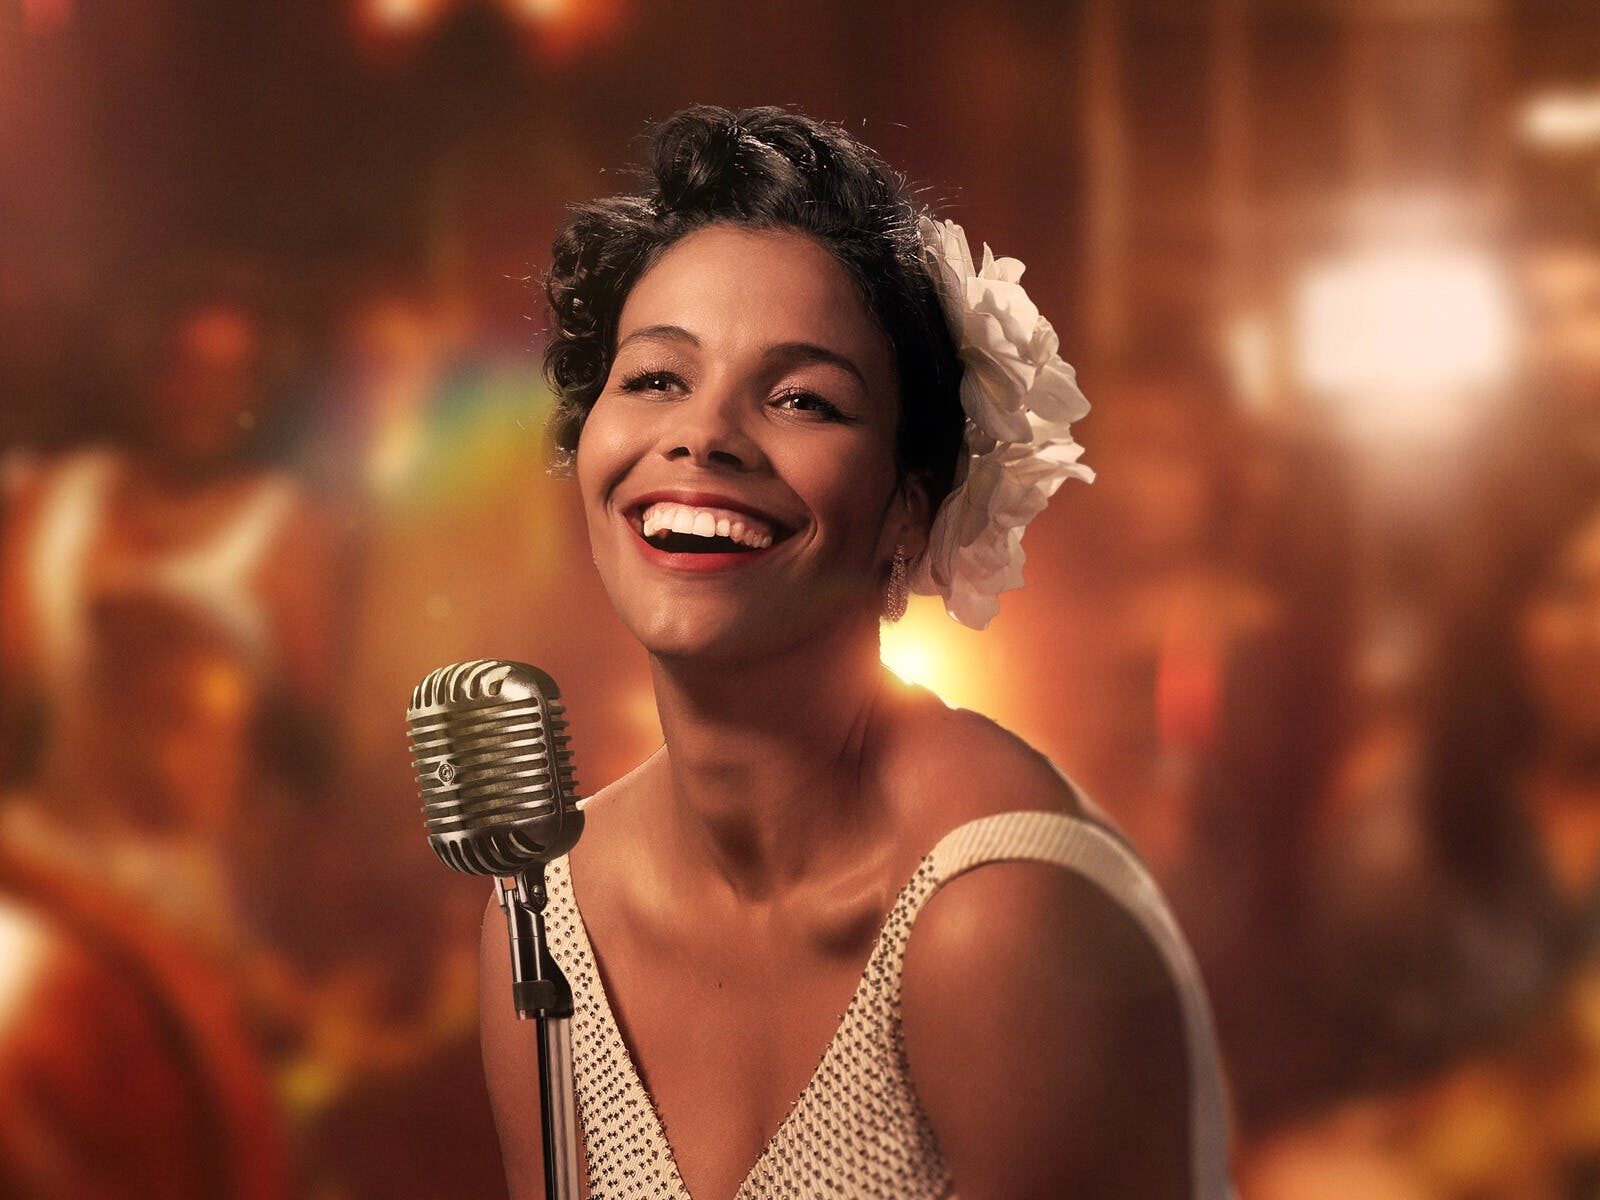 Zahra Newman wears a gardenia in her hair and smiled at the camera, stands in front of a vintage mic